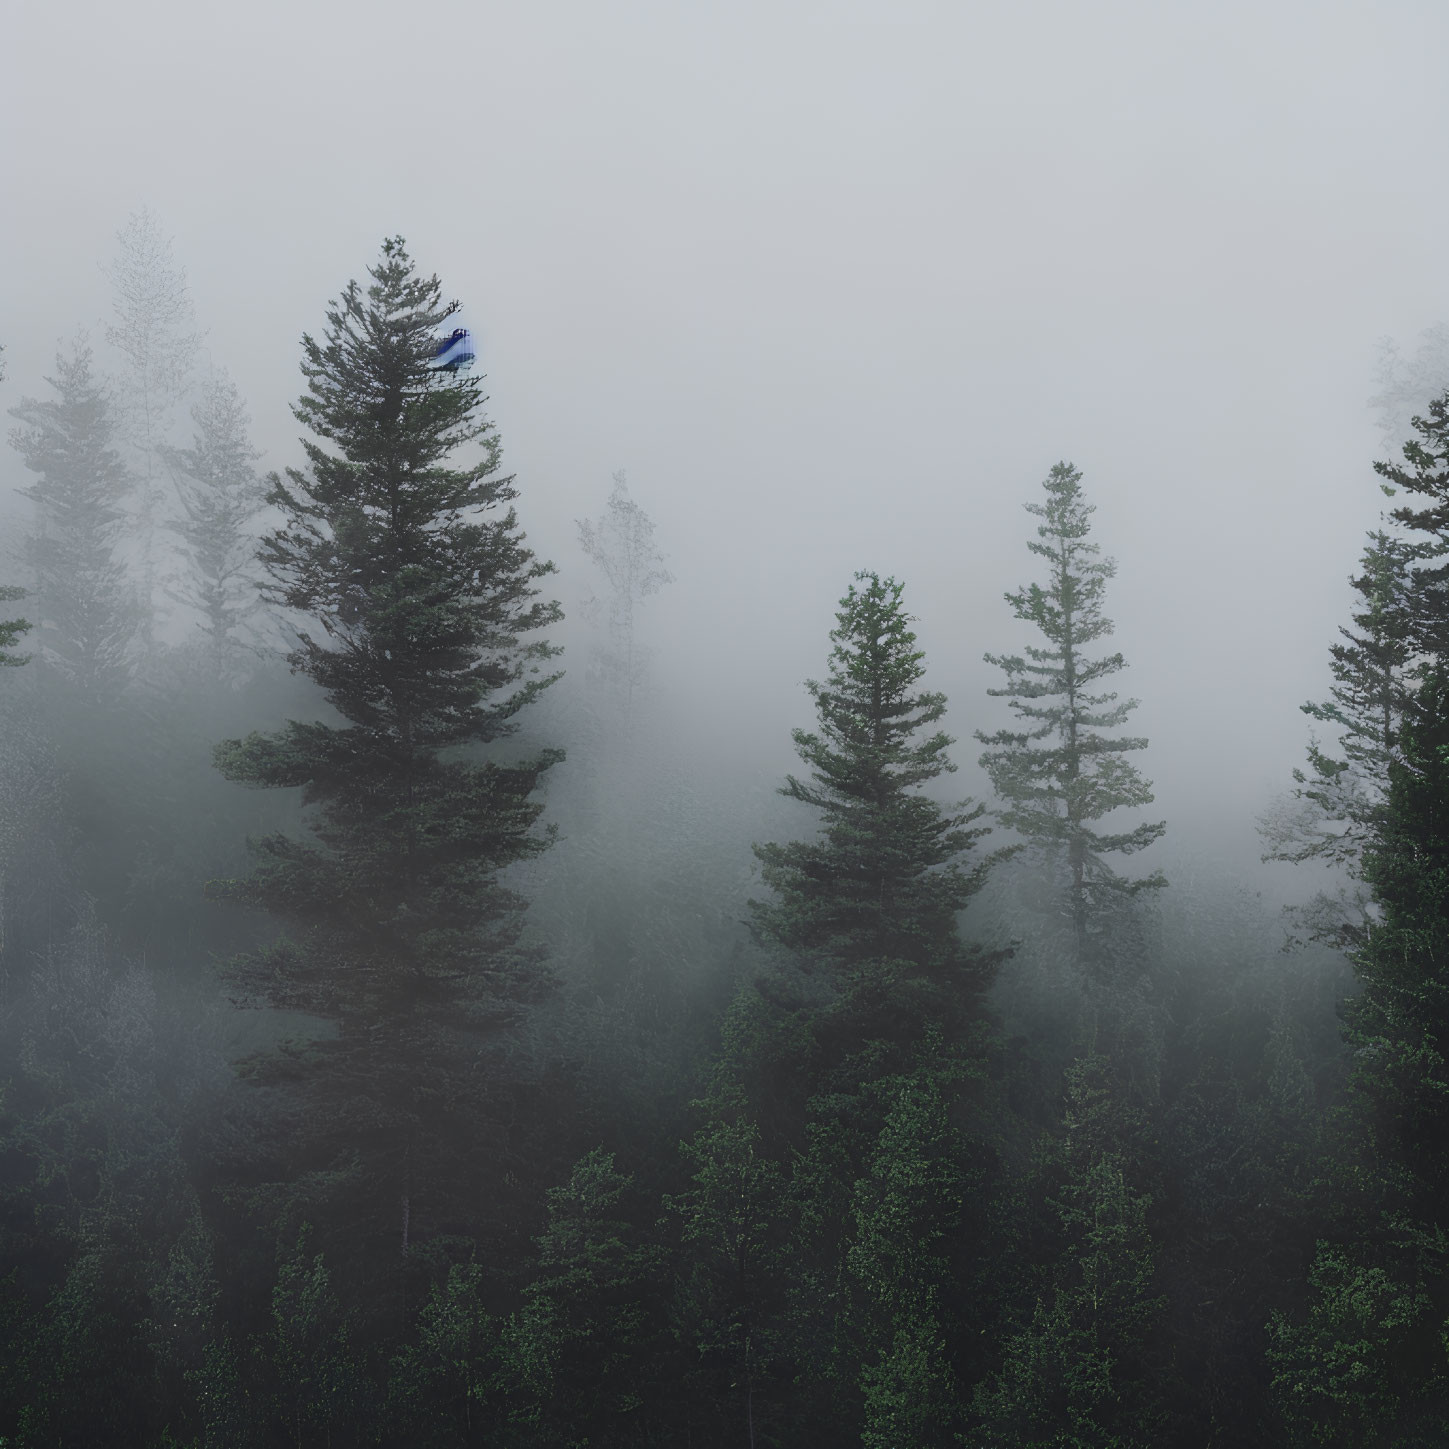 Misty forest scene with coniferous trees